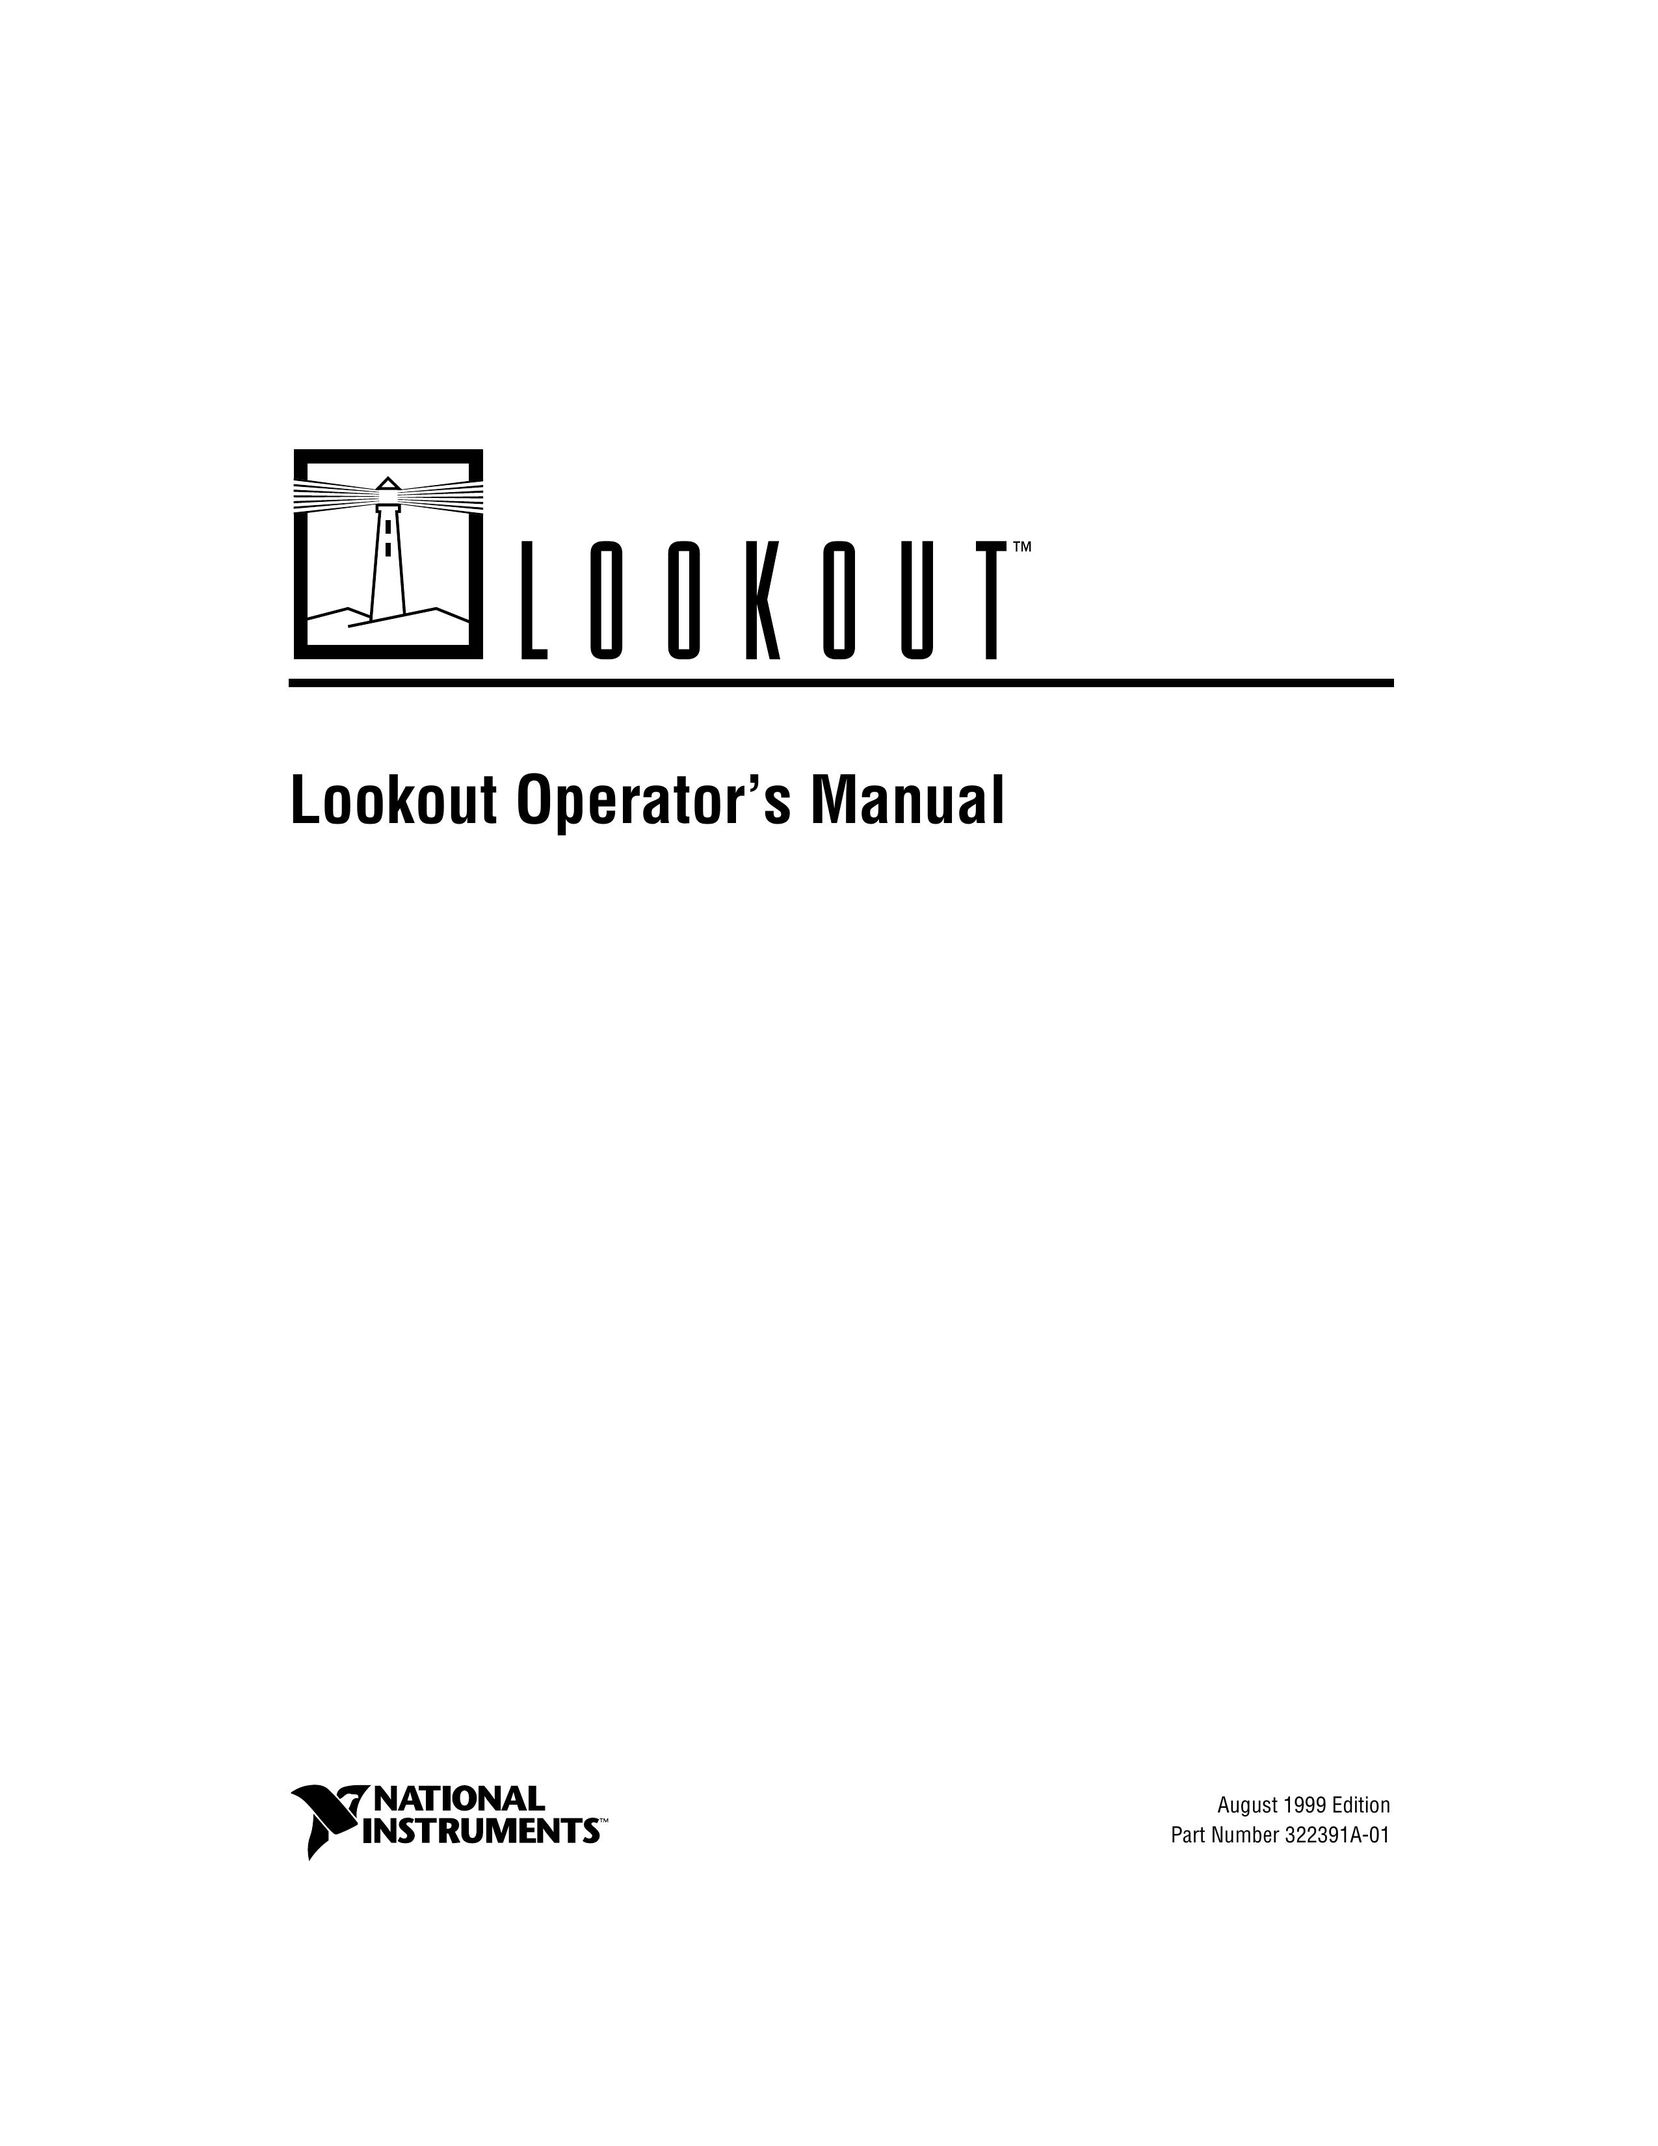 National Instruments 322391A-01 Vacuum Cleaner User Manual